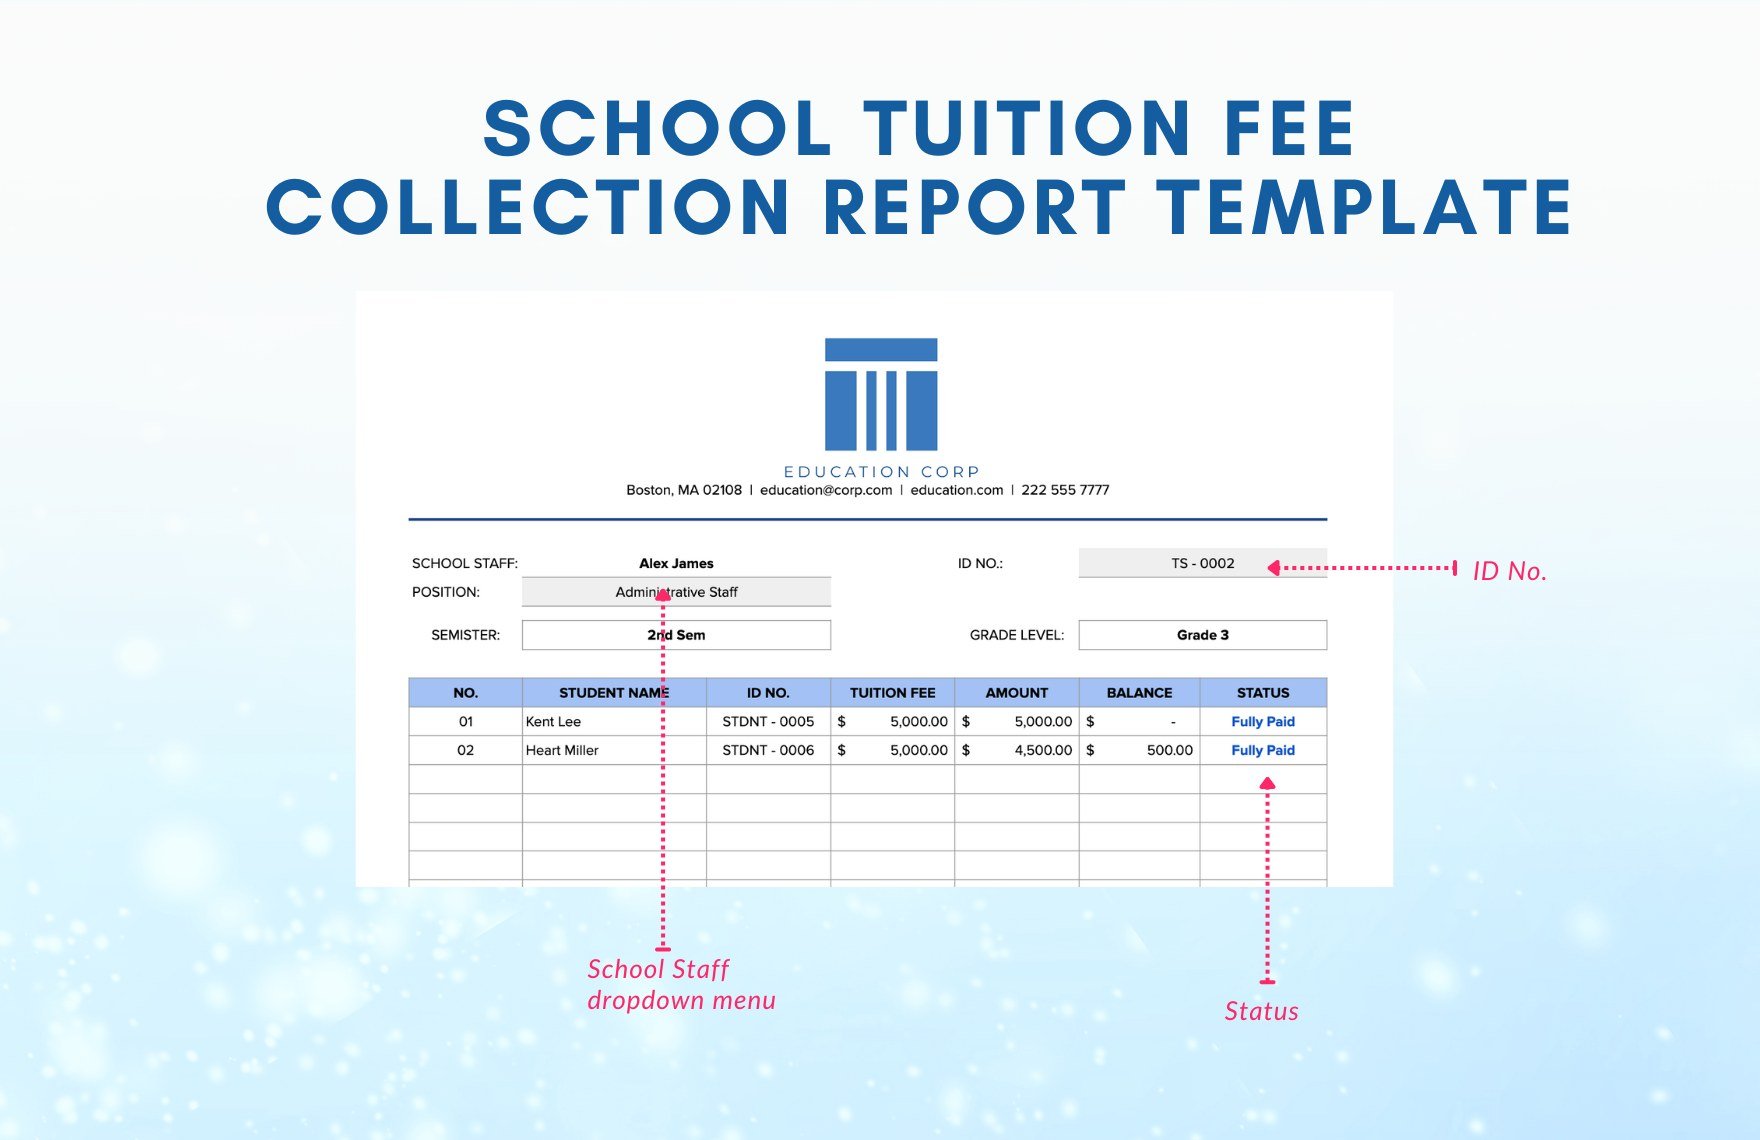 School Tuition Fee Collection Report Template